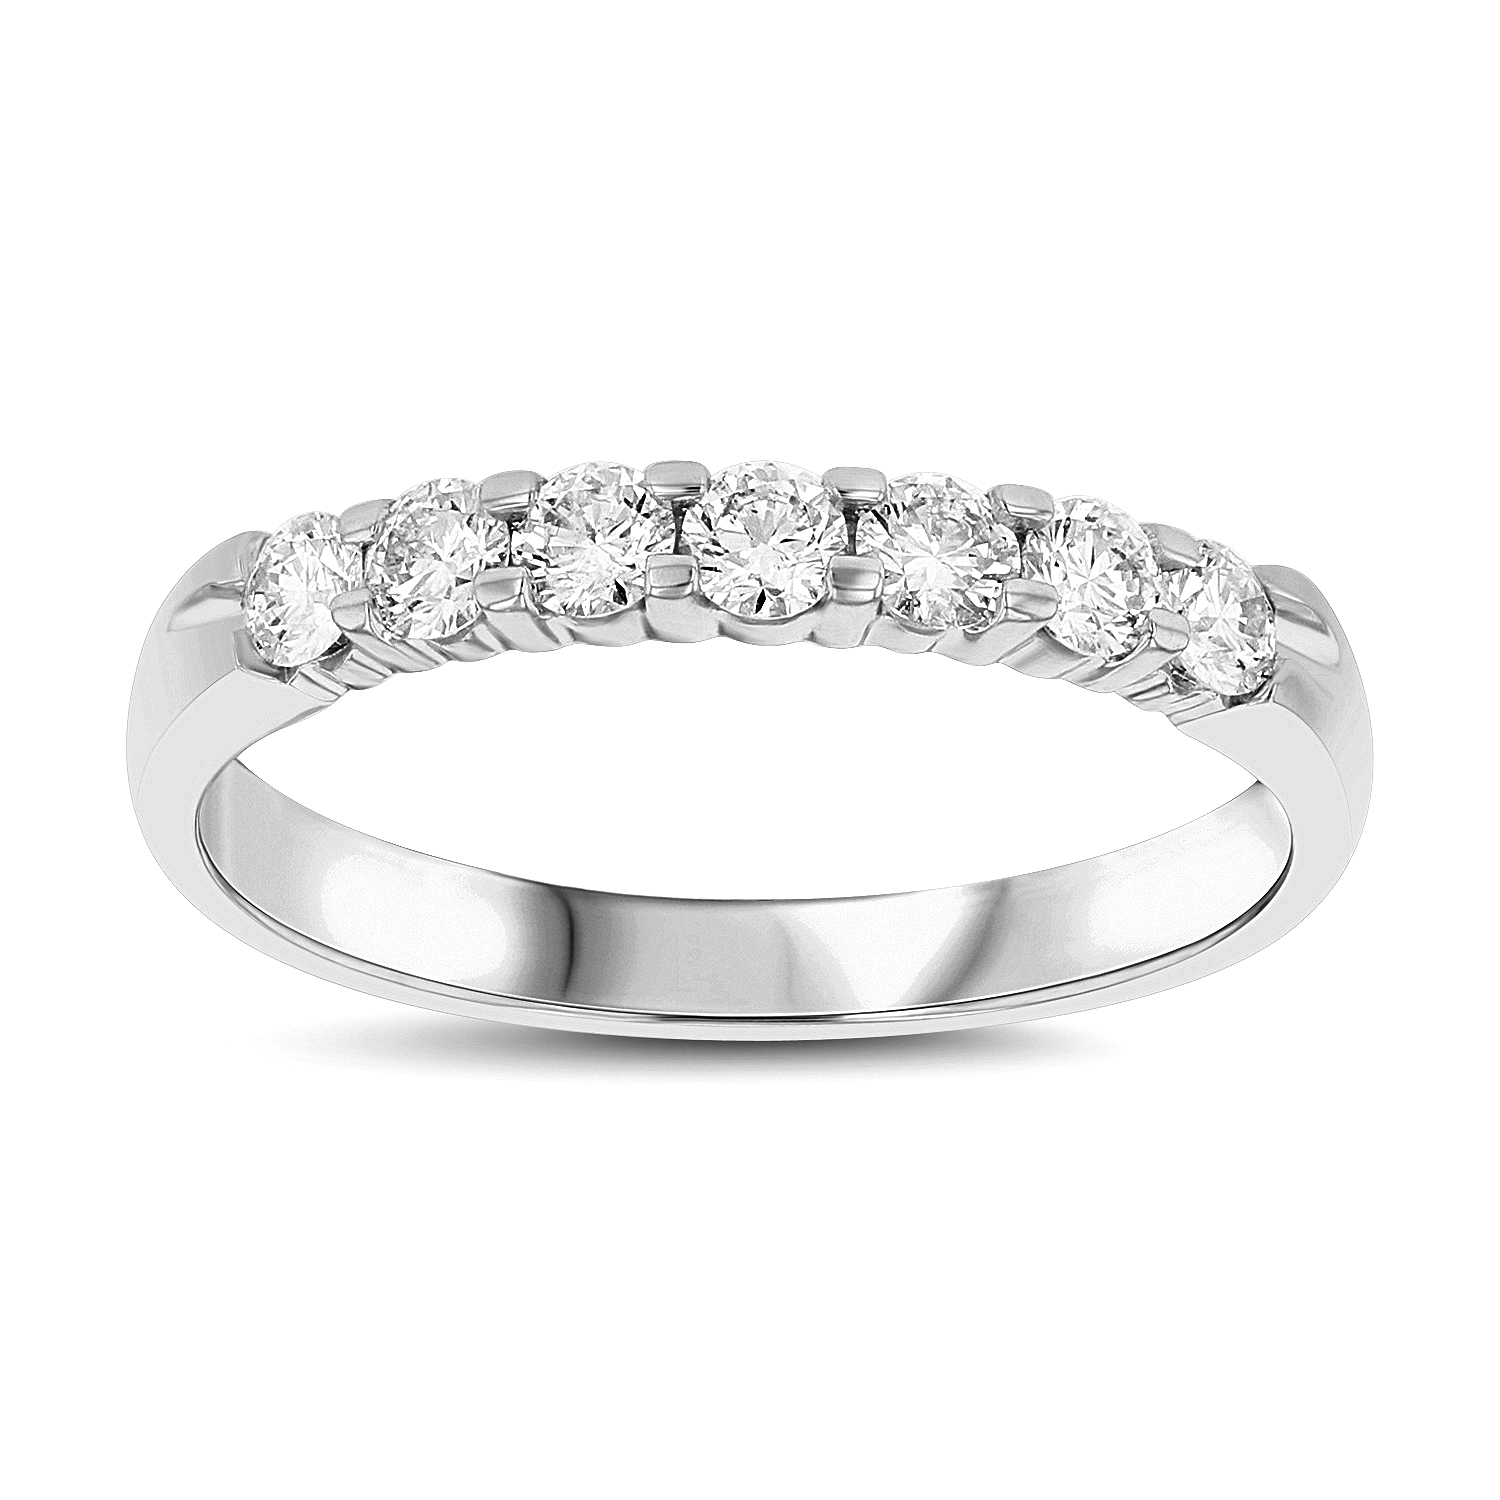 0.50ct tw 7 Stone Round Diamonds Shared Prong Anniversary or Wedding Band 14k Gold Bridal Ring H-J, SI